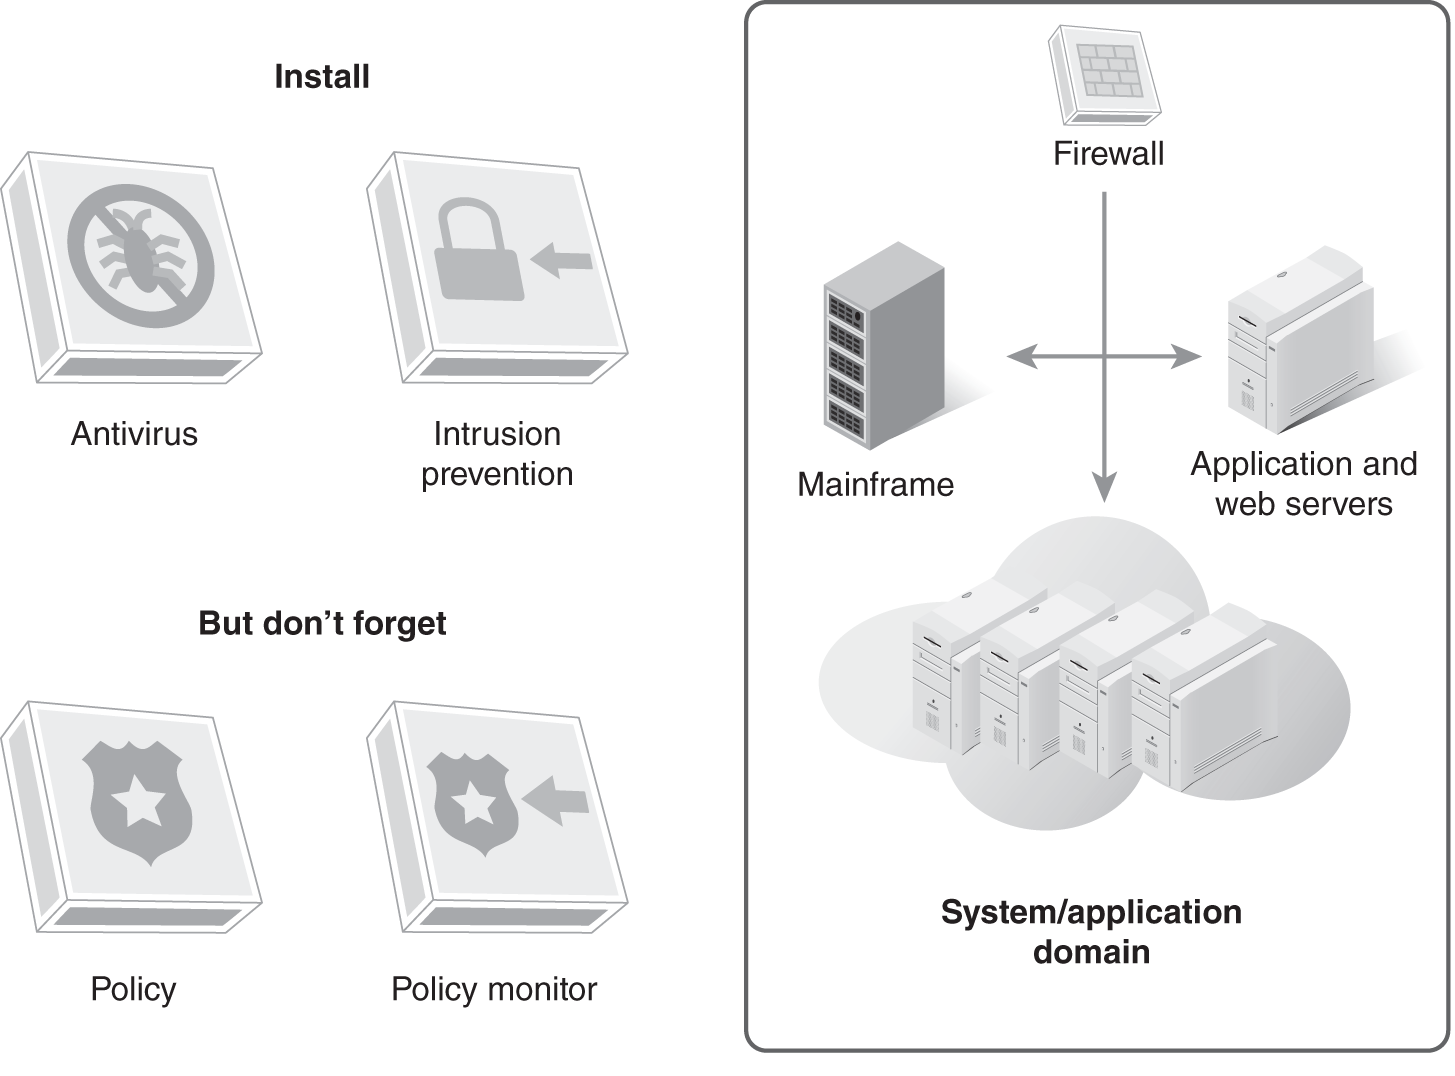 An illustrated diagram explains how to protect the infrastructure through logical and physical security policies and procedures.